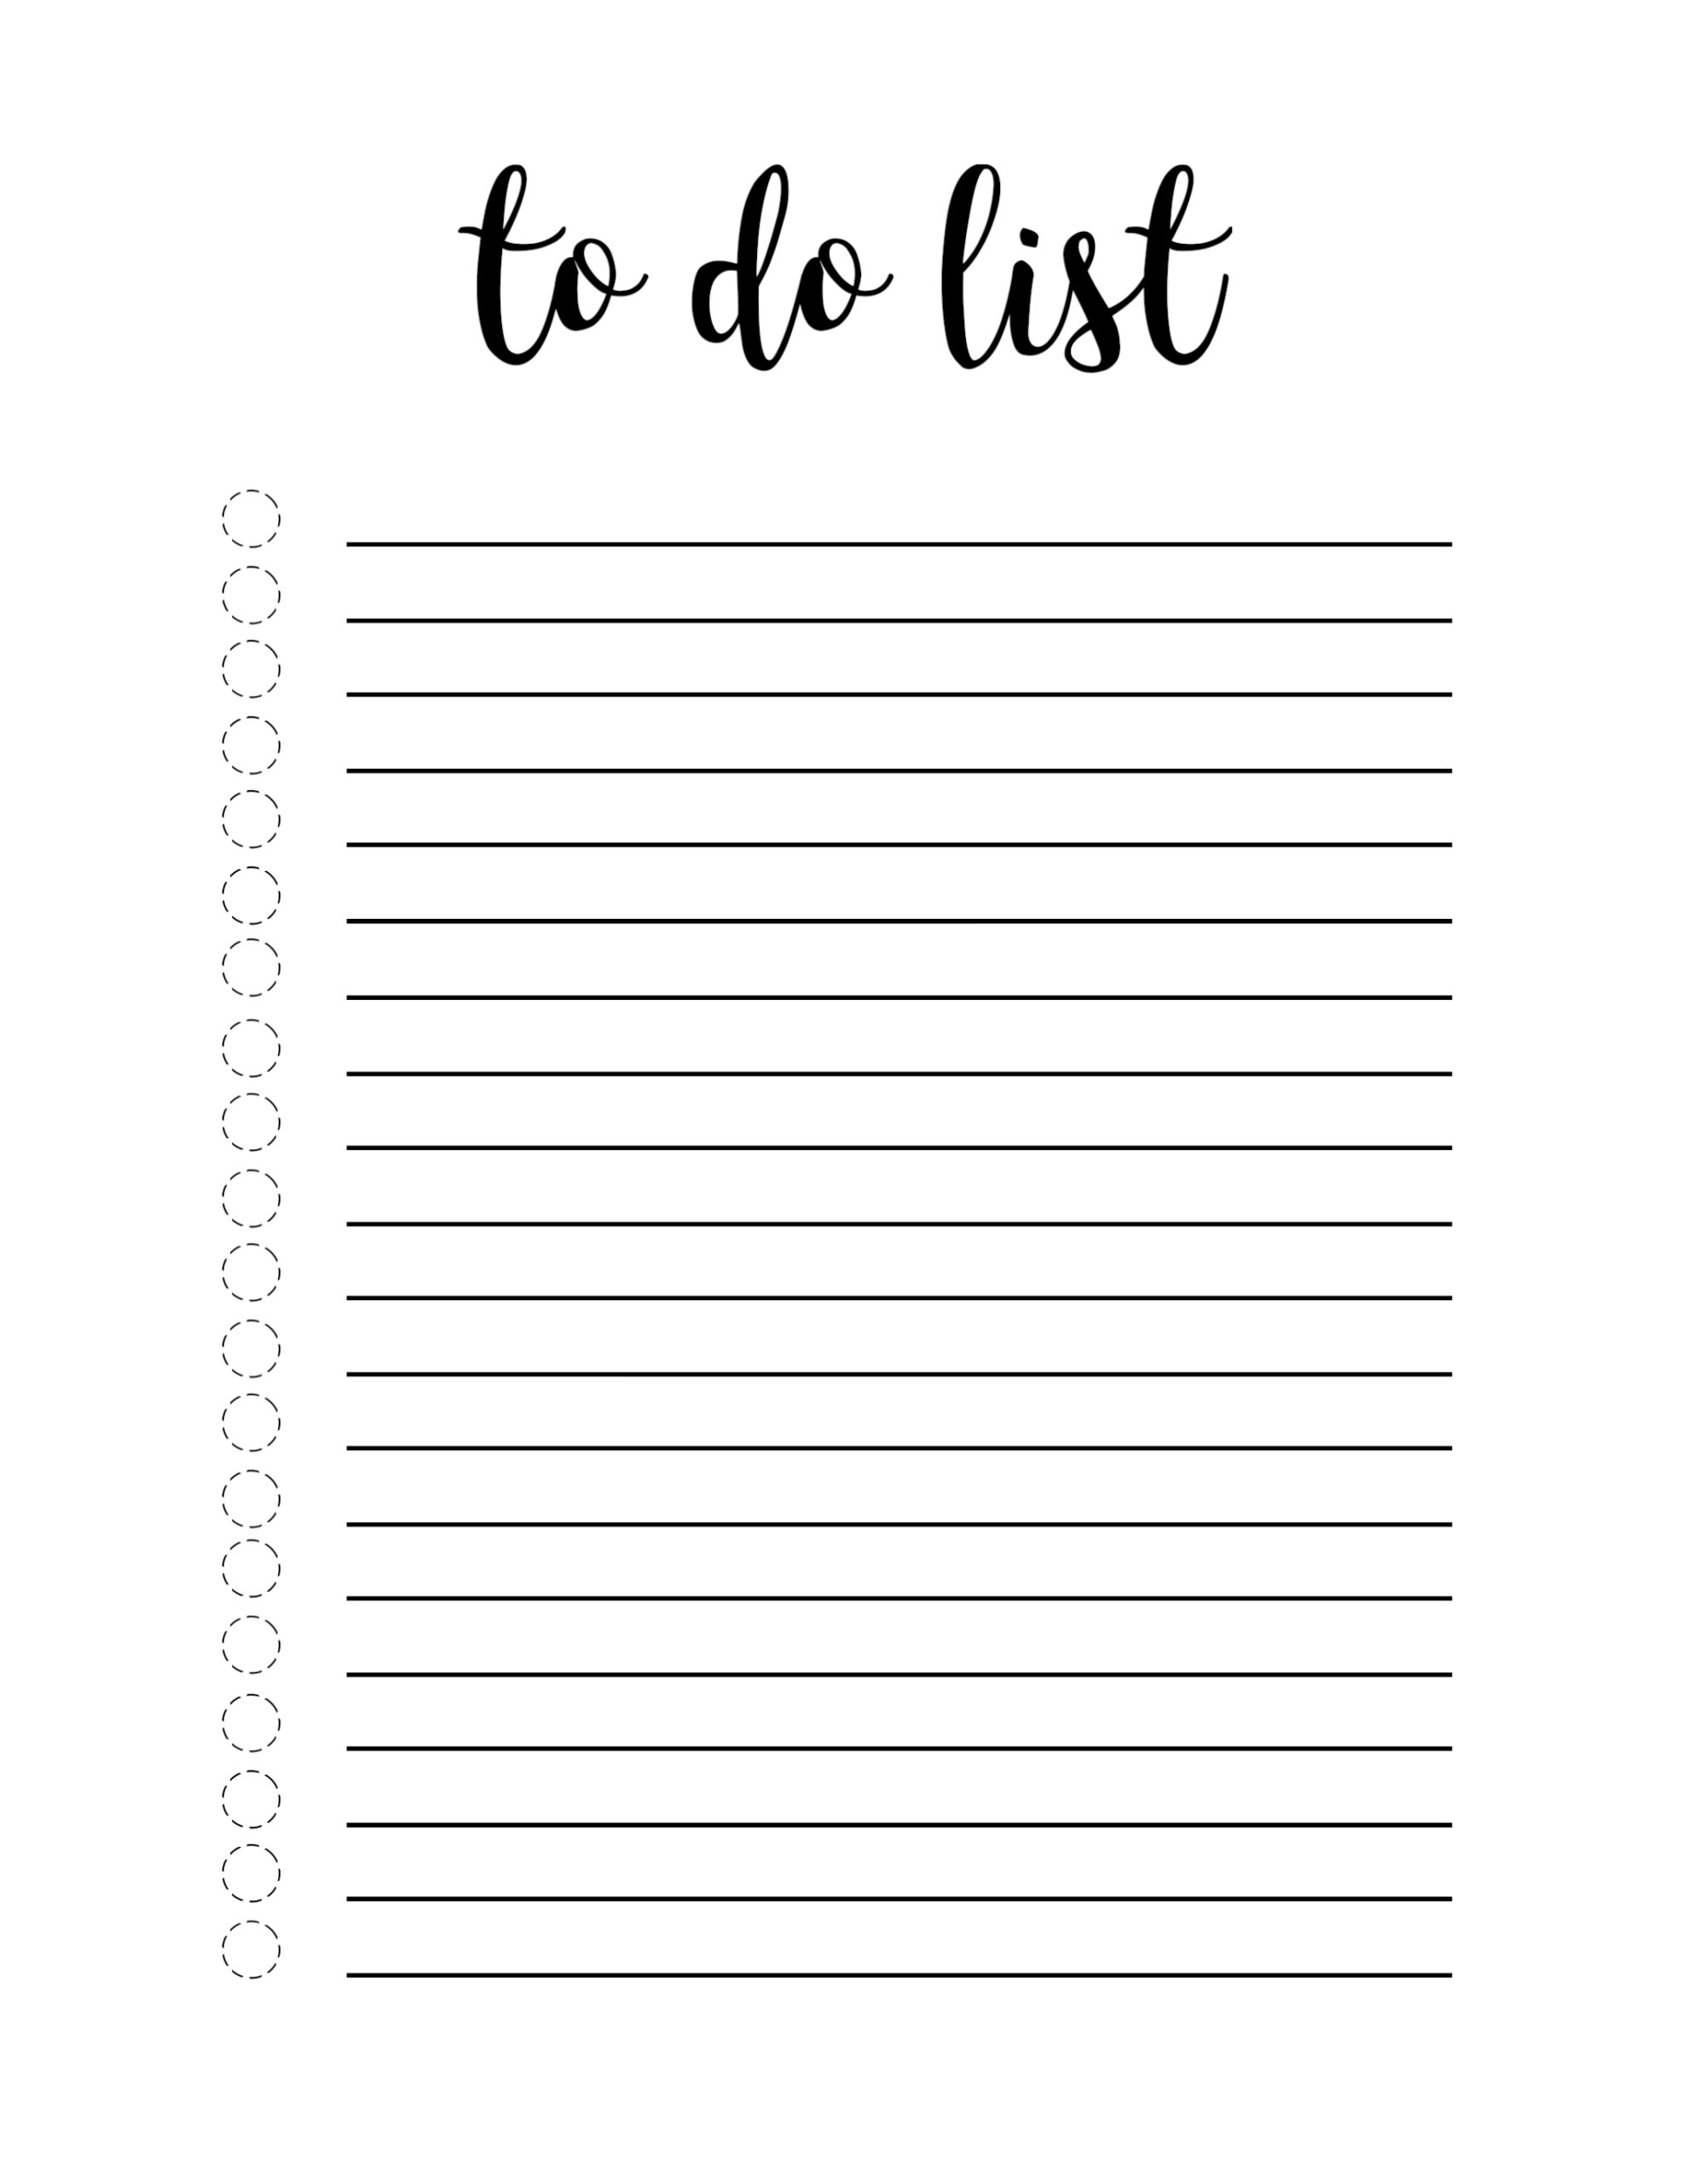 Free Printable To Do List Template - Paper Trail Design Within Blank To Do List Template